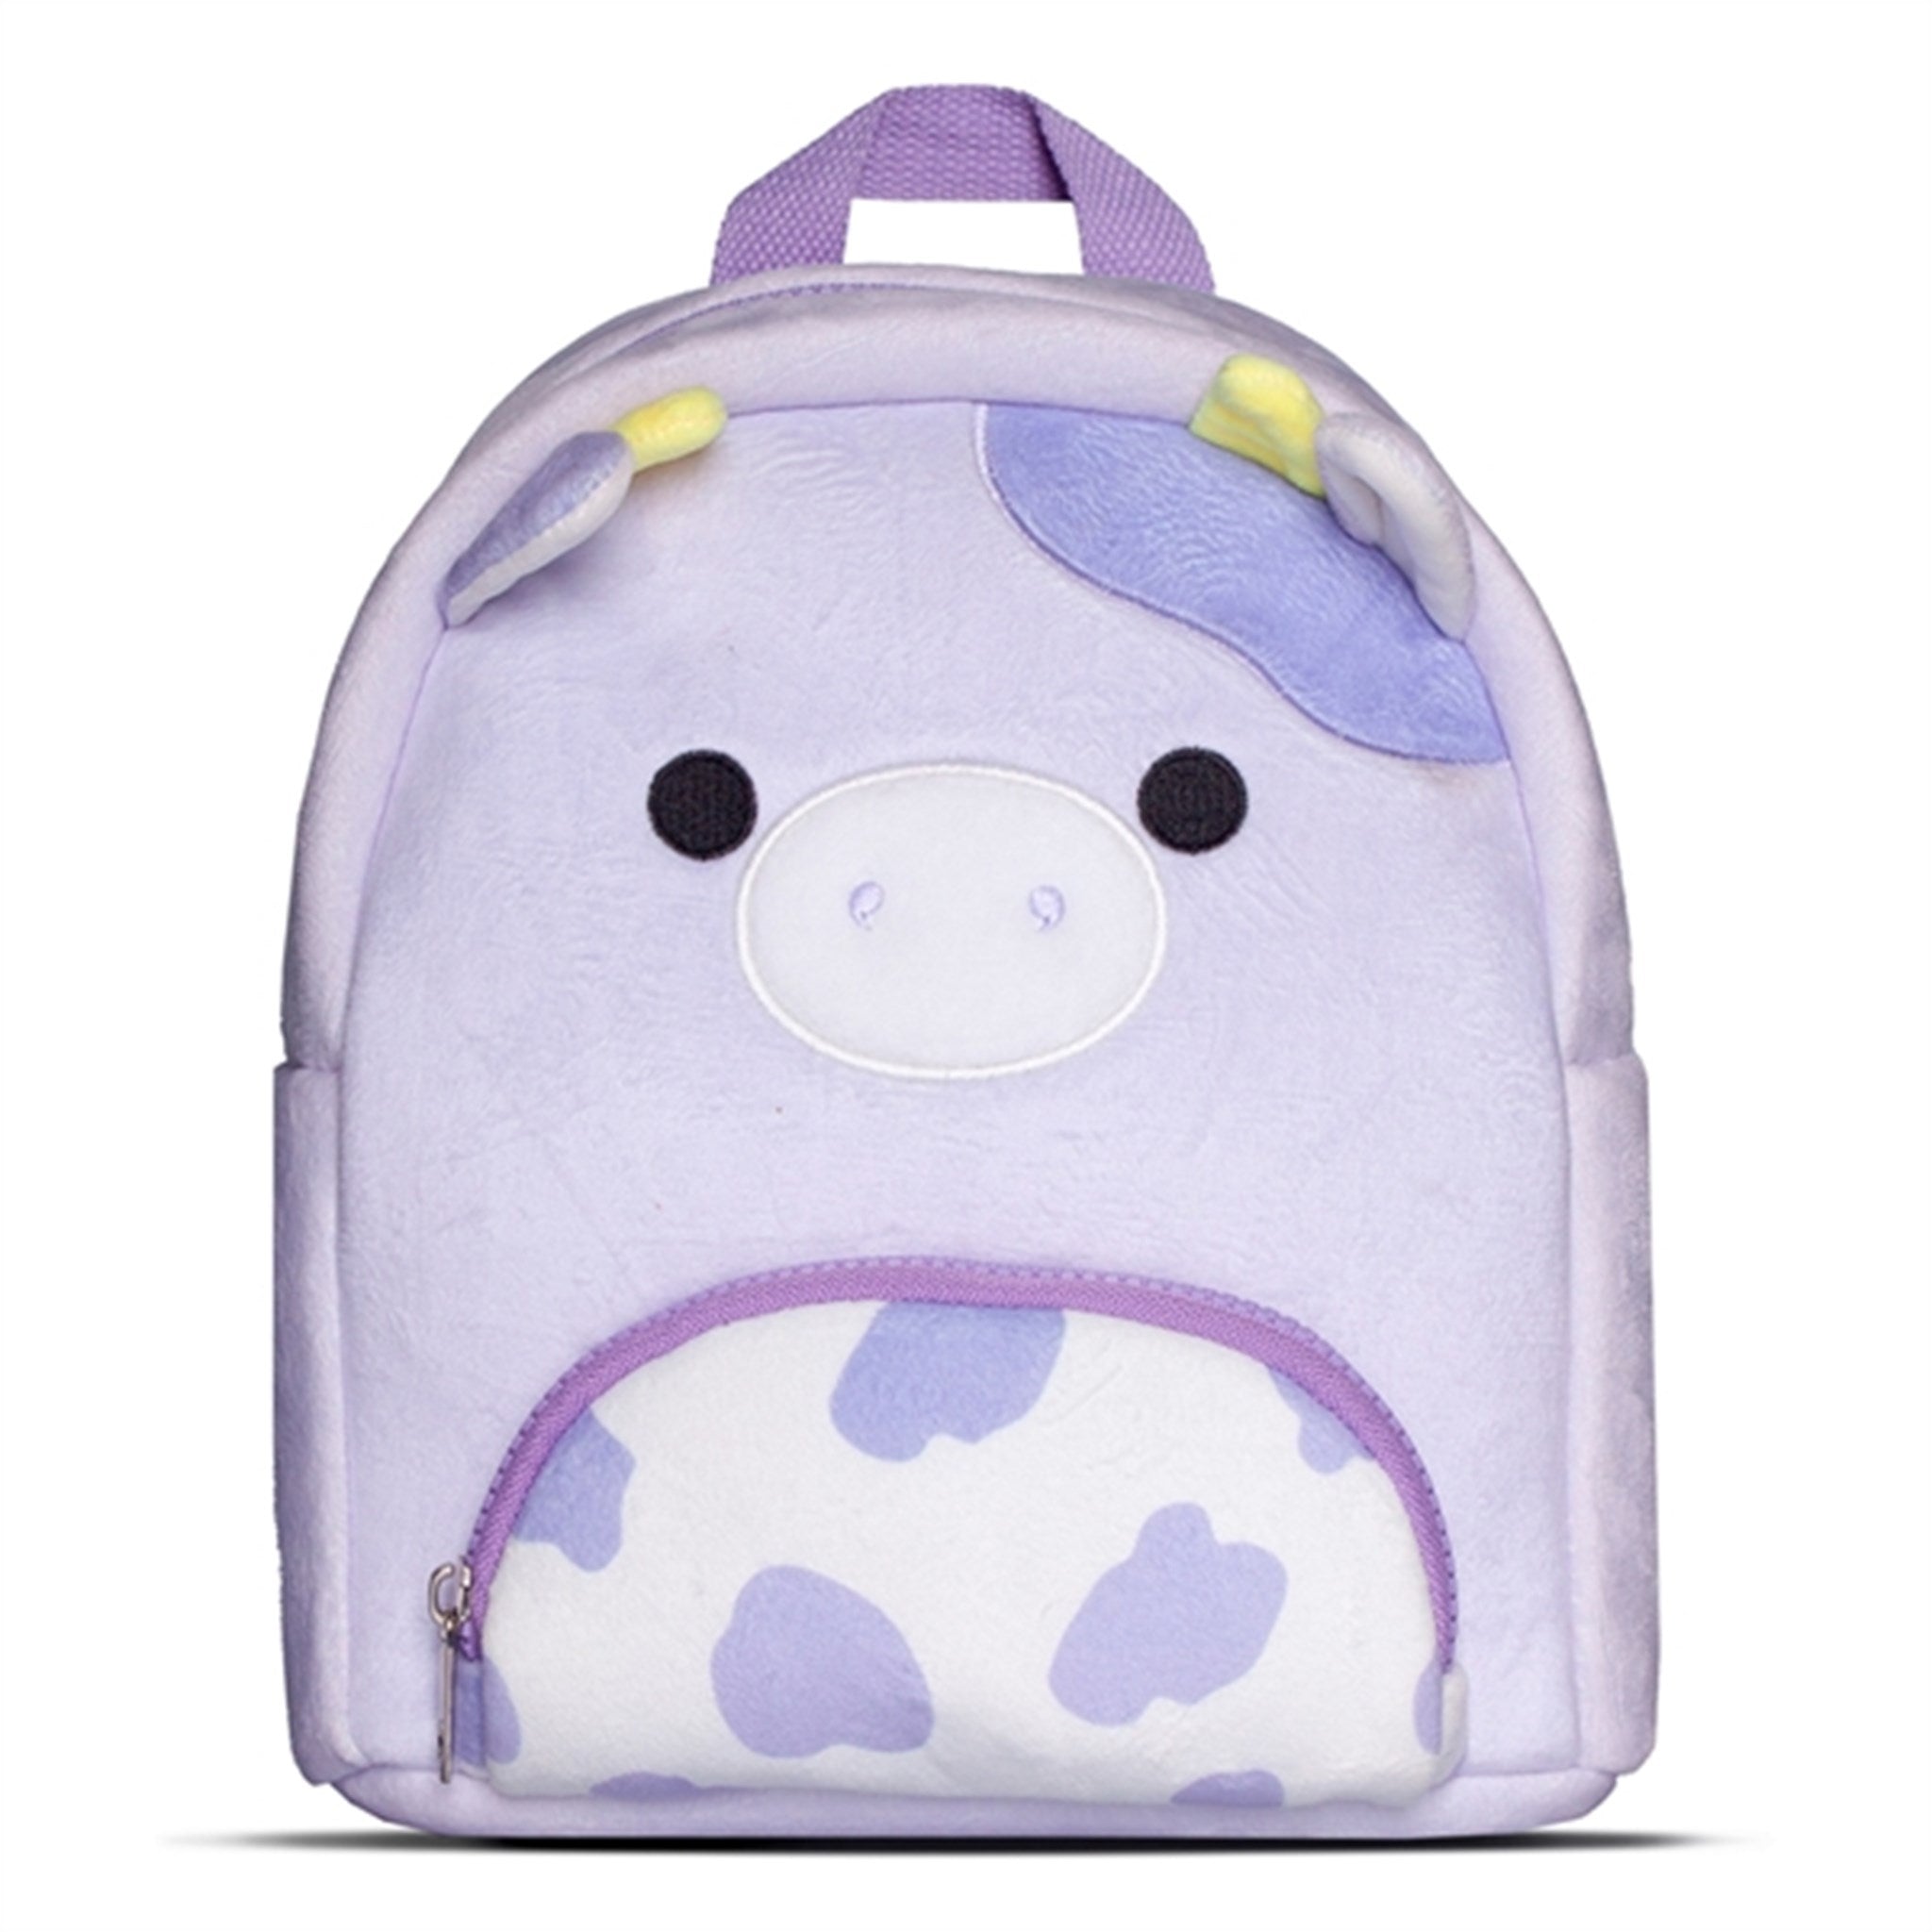 Squishmallows Backpack Bubba